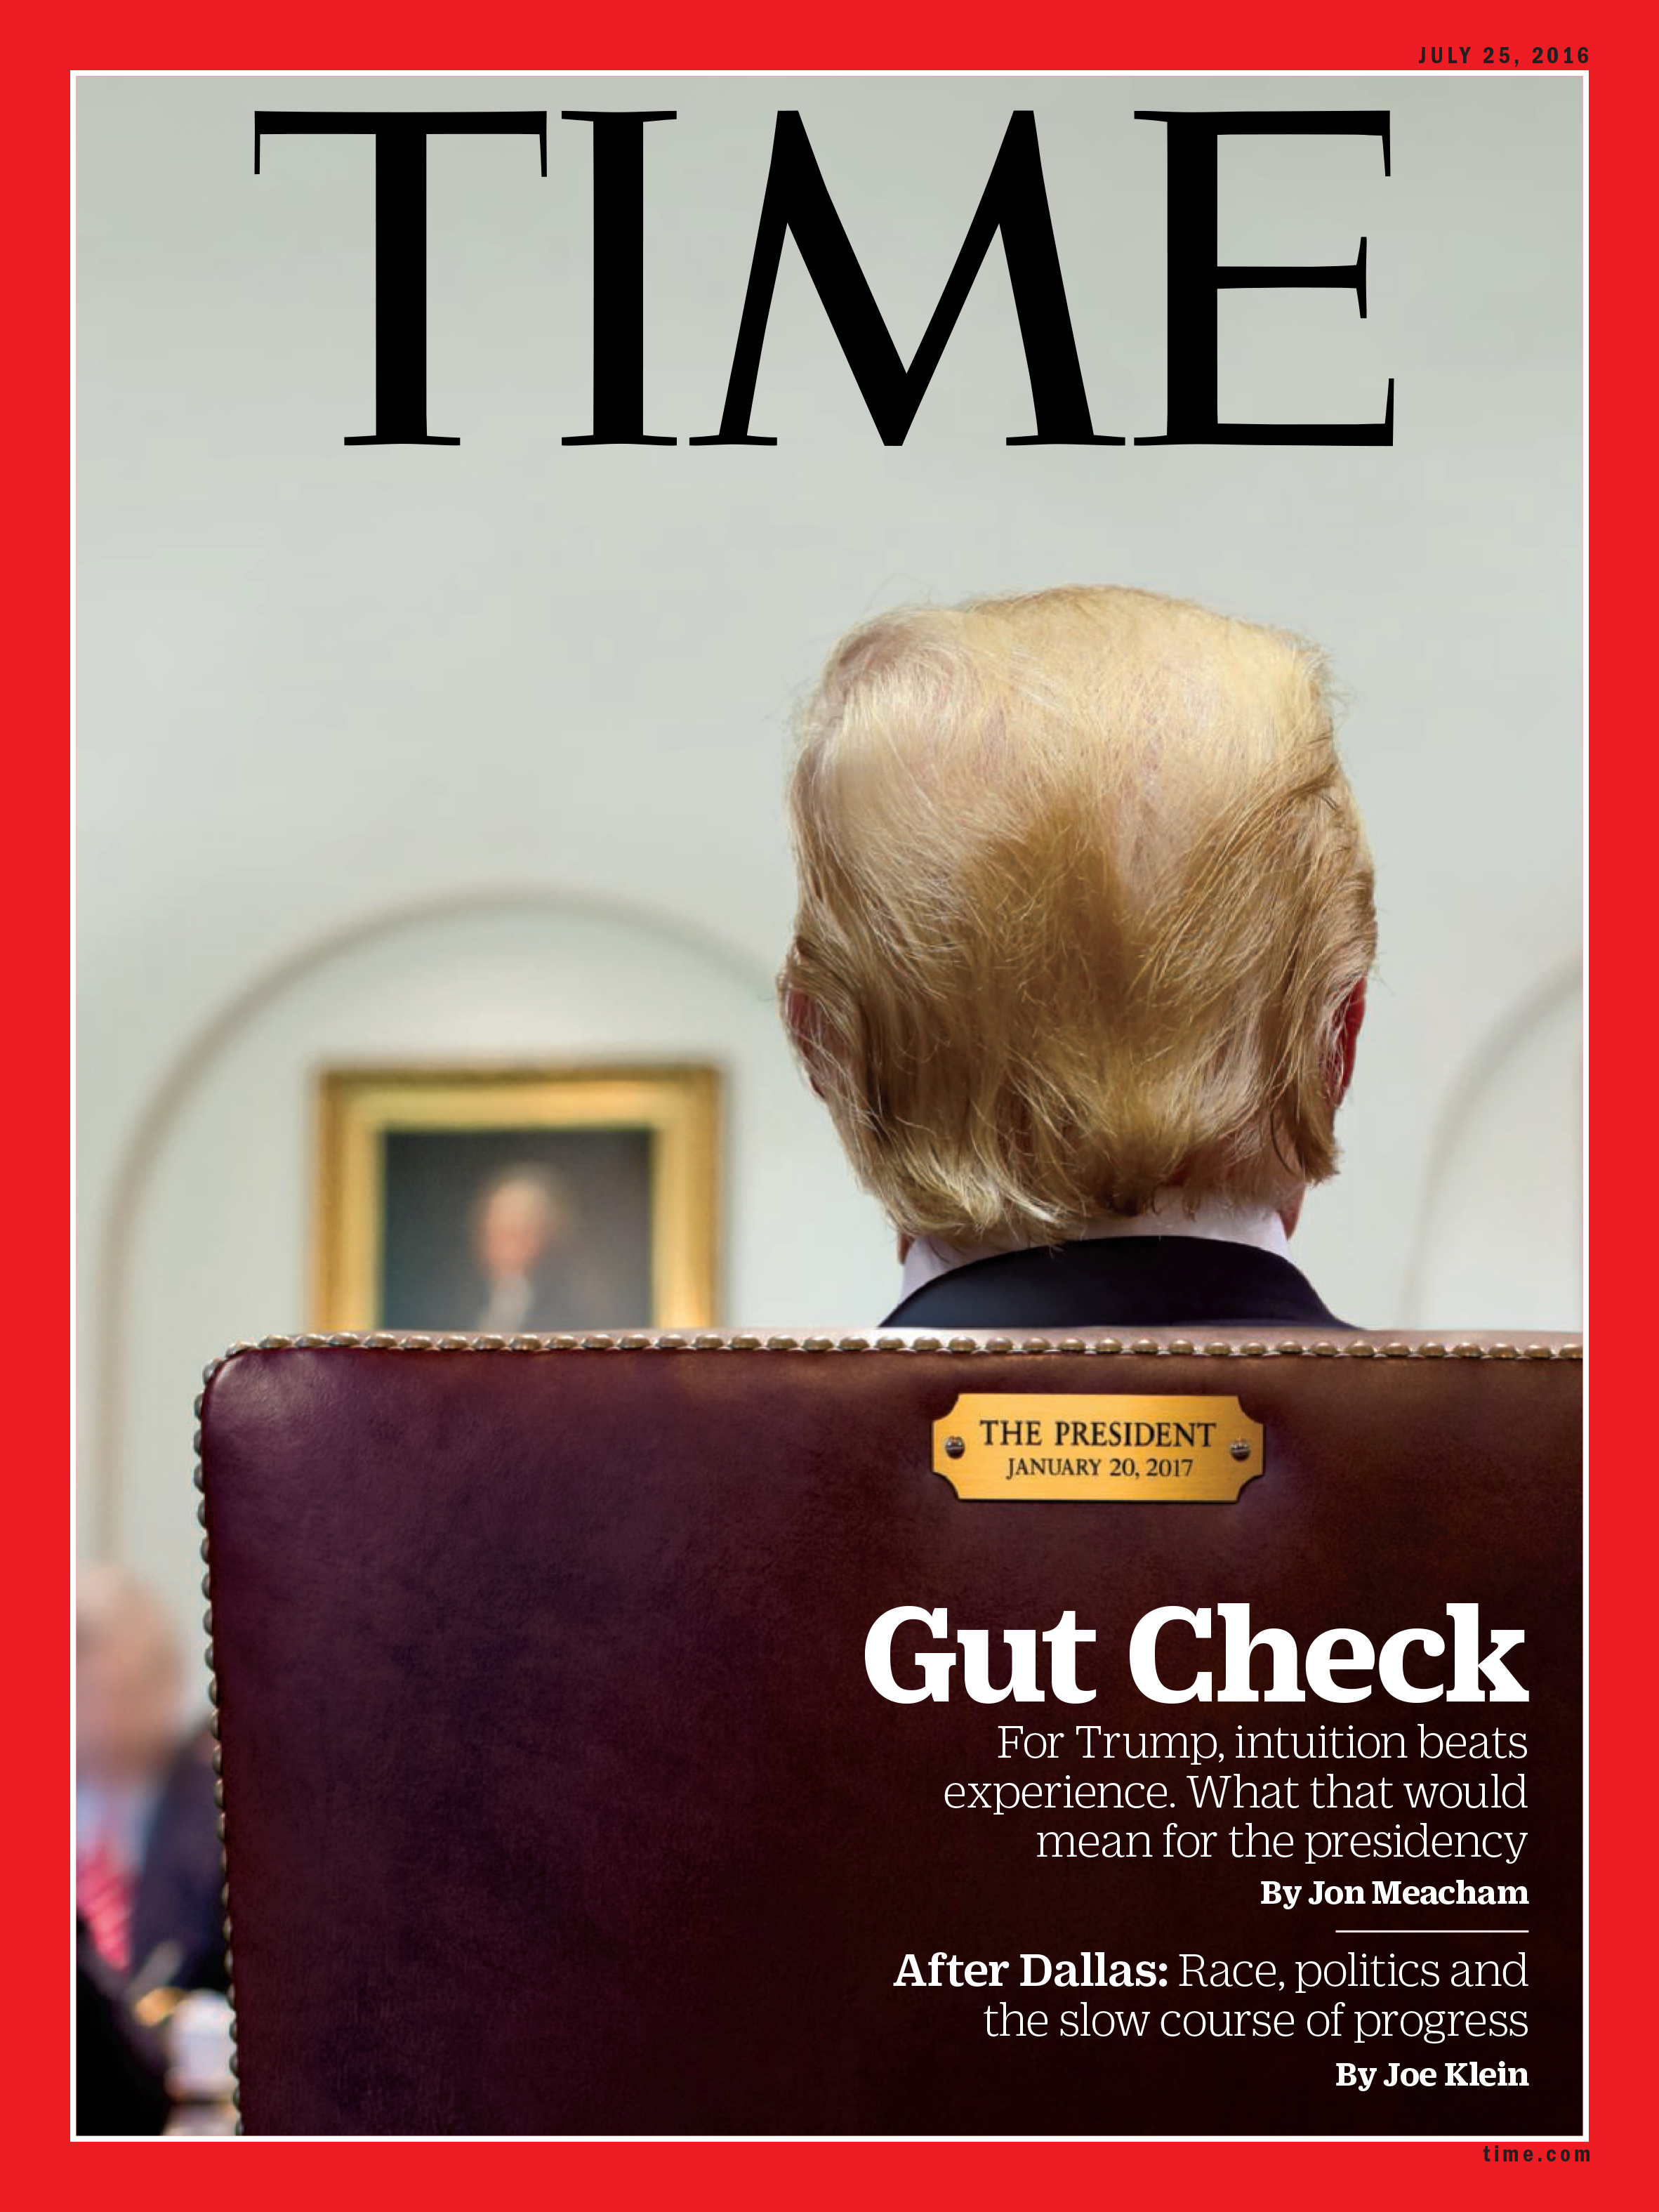 The Jul. 25, 2016 issue of TIME.